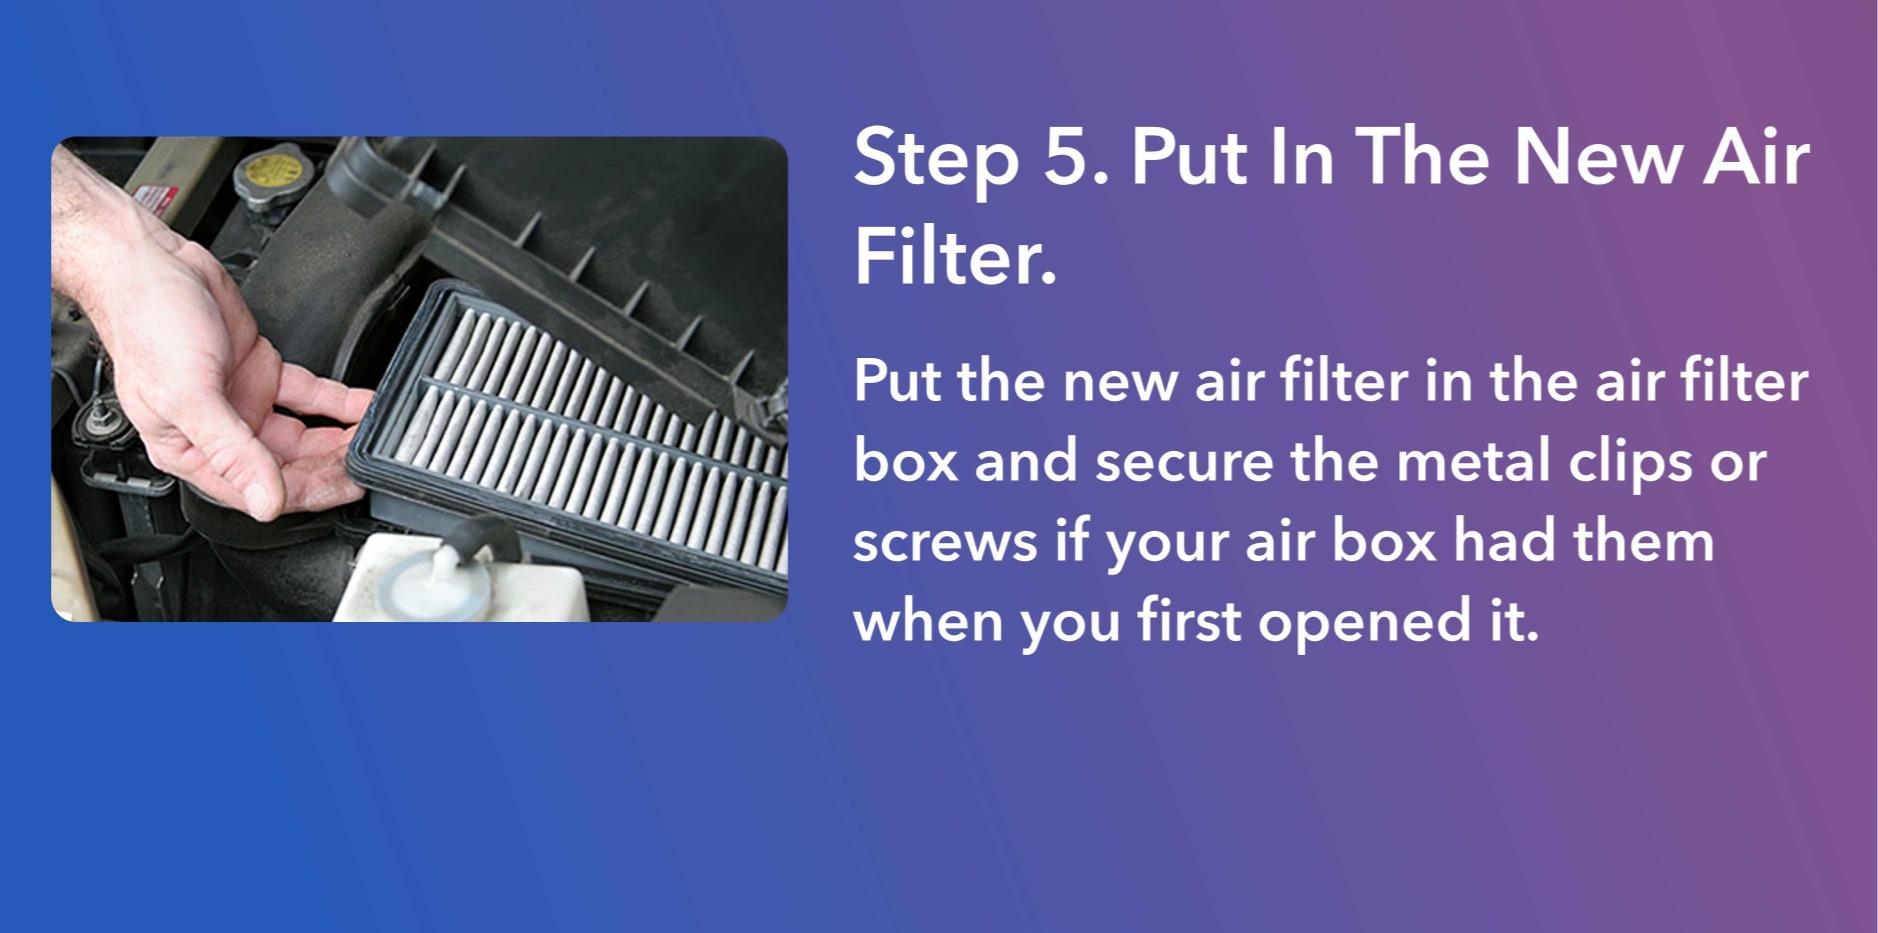 Put the new air filter in the air filter box and secure the metal clips or screws if your air box had them when you first opened it.